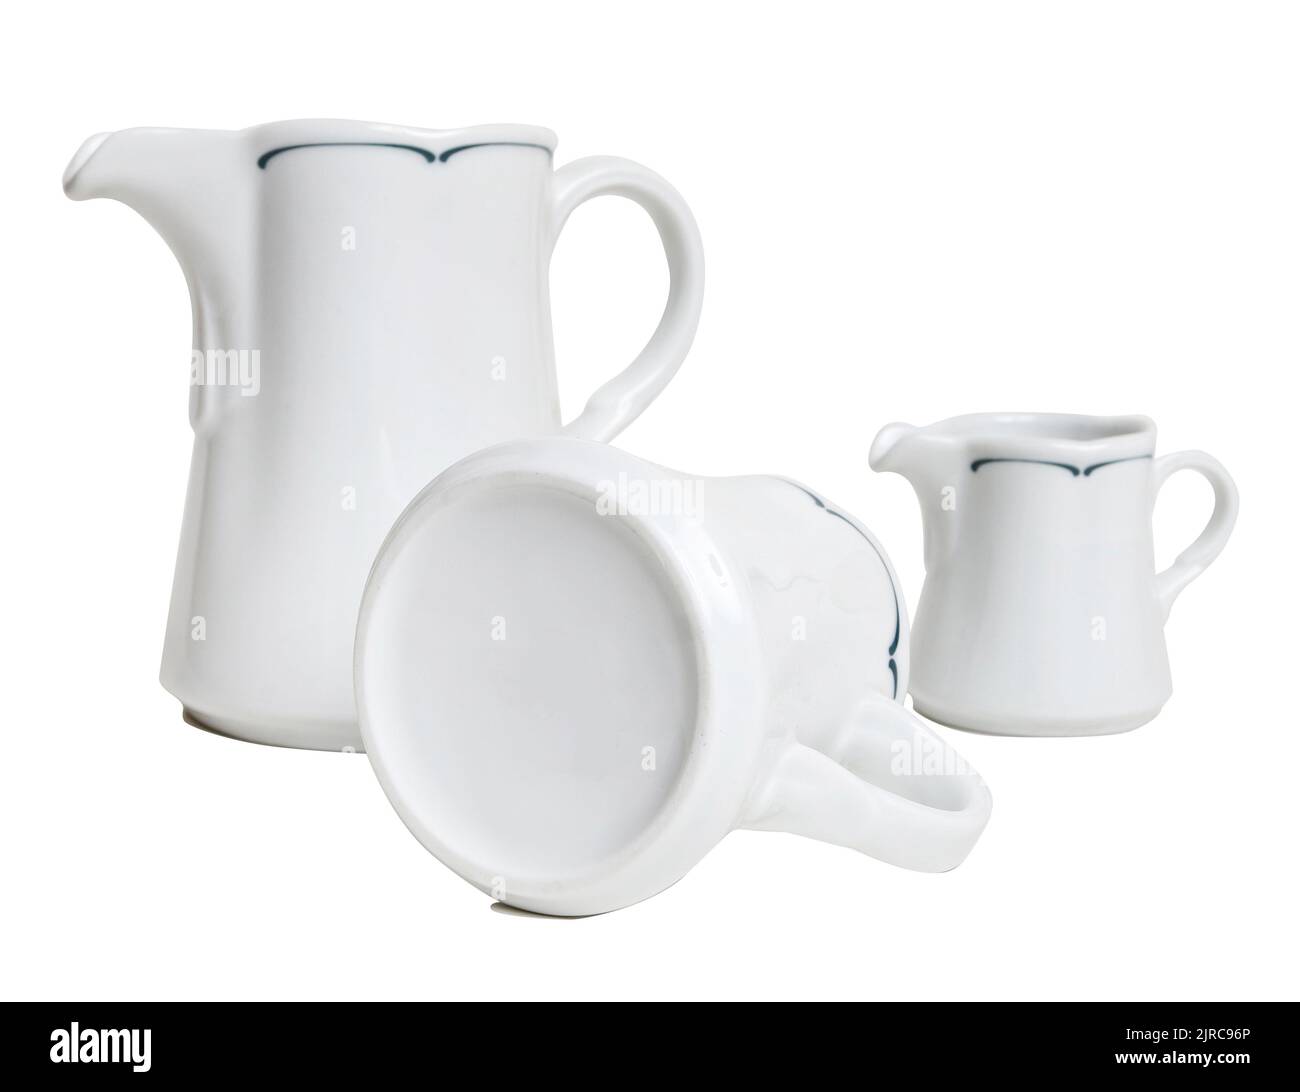 https://c8.alamy.com/comp/2JRC96P/porcelain-jugs-isolated-on-a-white-background-graphic-resources-2JRC96P.jpg